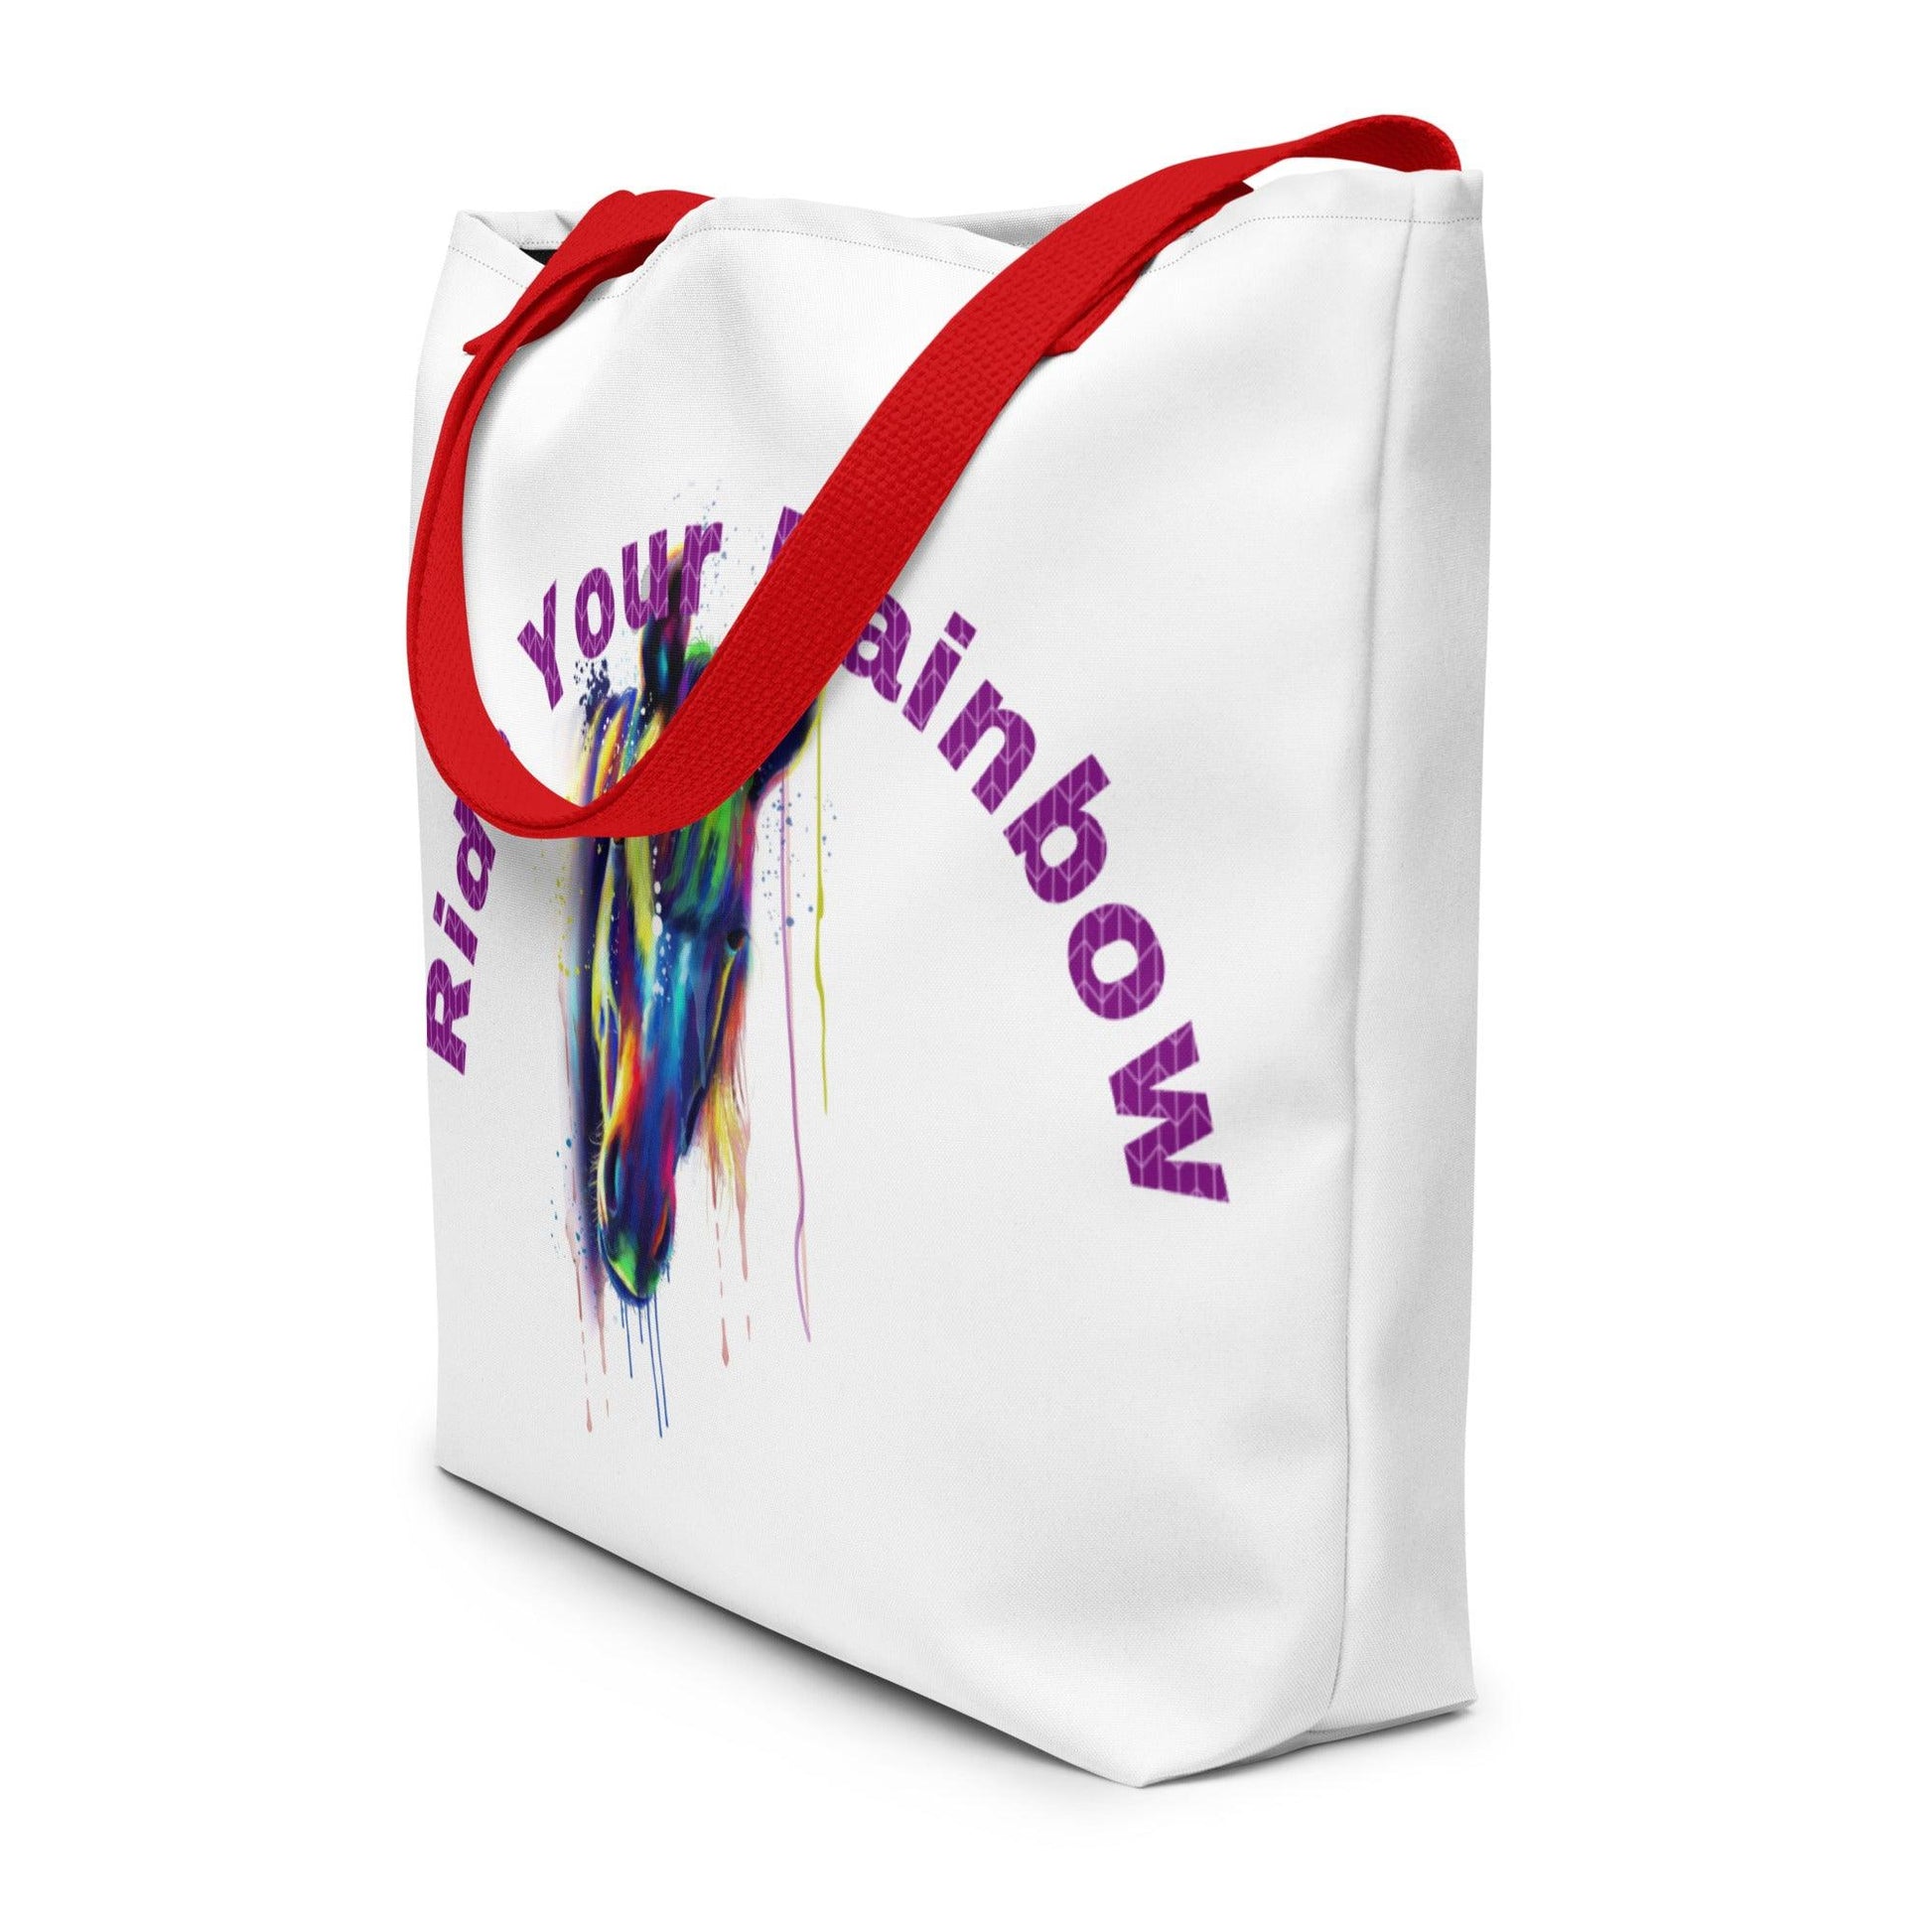 Ride Your Rainbow Horse Tote Bag - L & M Kee, LLC